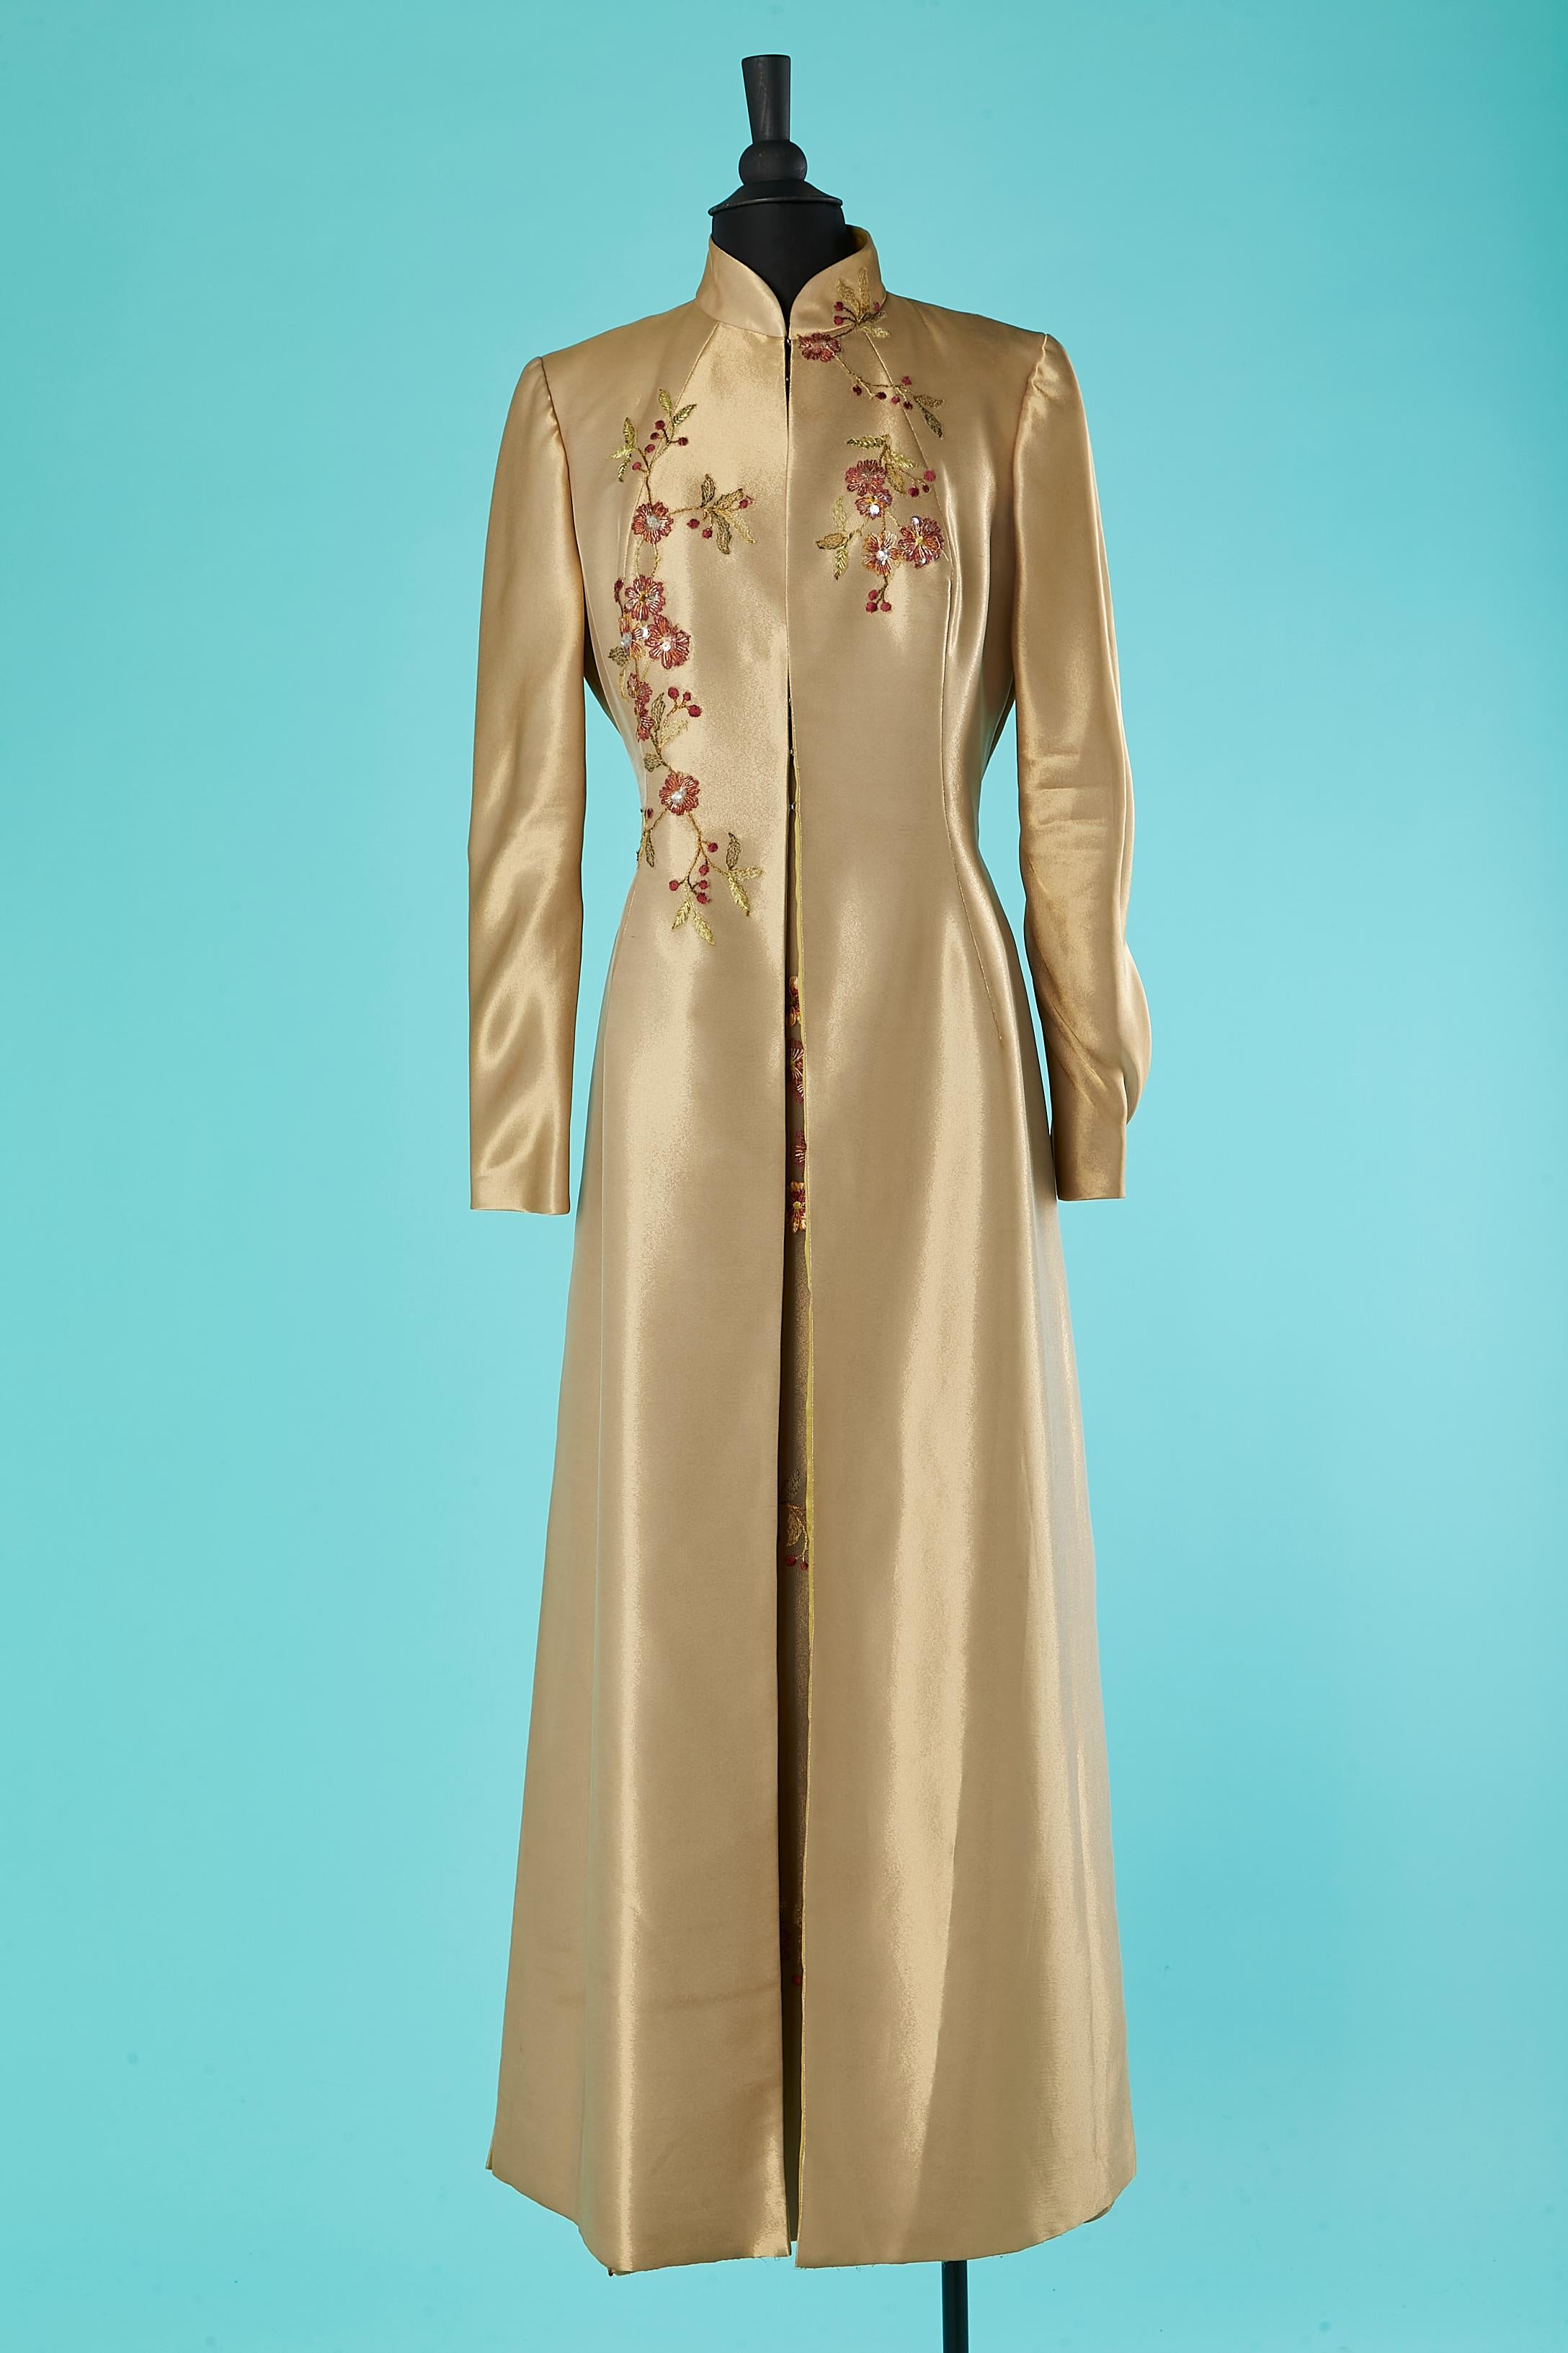 coat and dress ensemble with embroideries. 
Main fabric composition: 59% polyester, 20% silk, 21% rayon. Satin lining. Dress closure: zip in the middle back. Coat closure : hook&eye in the middle front. 
Split on the front side of the dress= 48